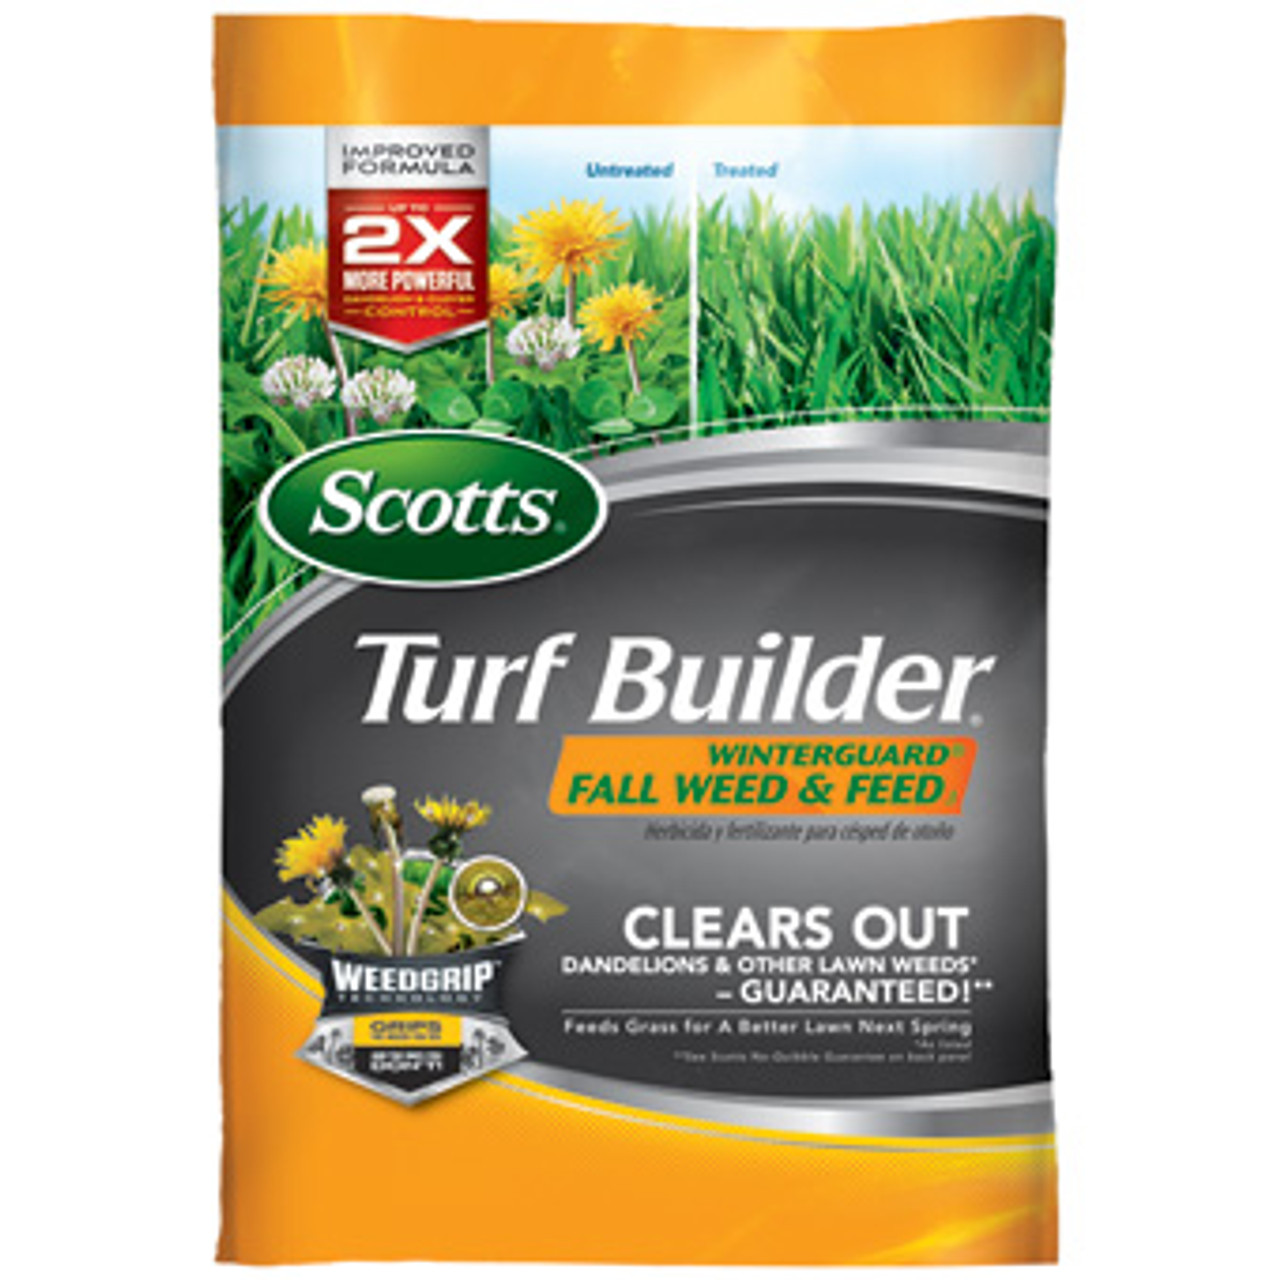 scotts-turf-builder-winterguard-fall-weed-feed-4m-maxwell-s-of